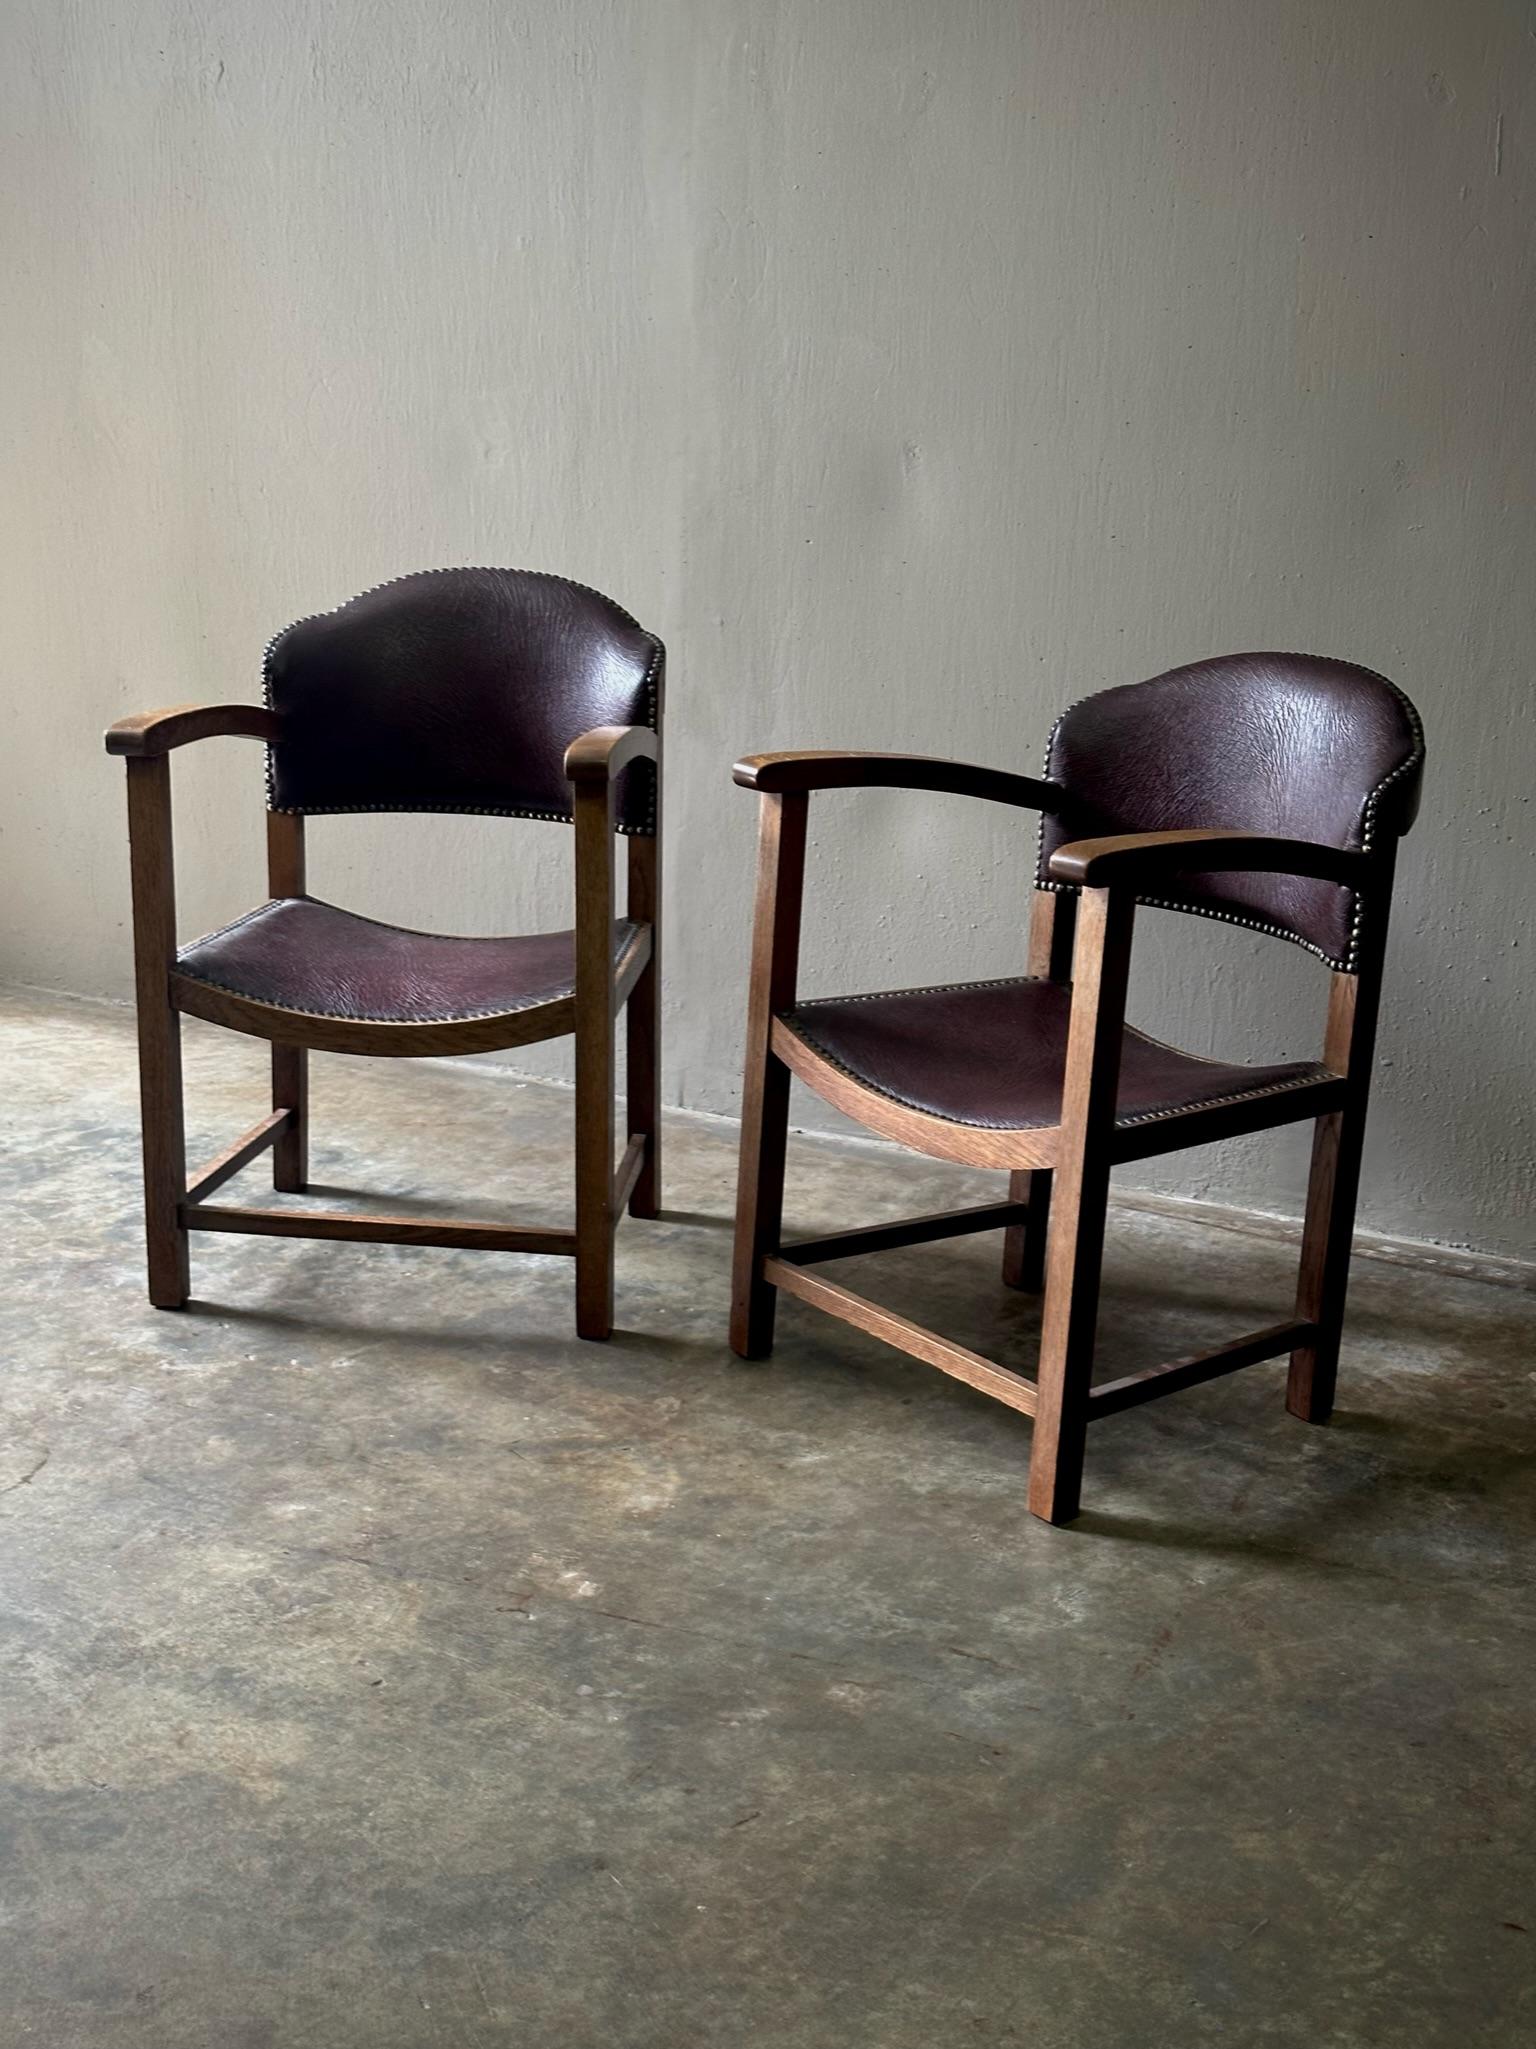 Pair of upholstered armchairs in oak

Holland, circa 1940

Dimensions: 21W x 23D x 30H (seat height 14)